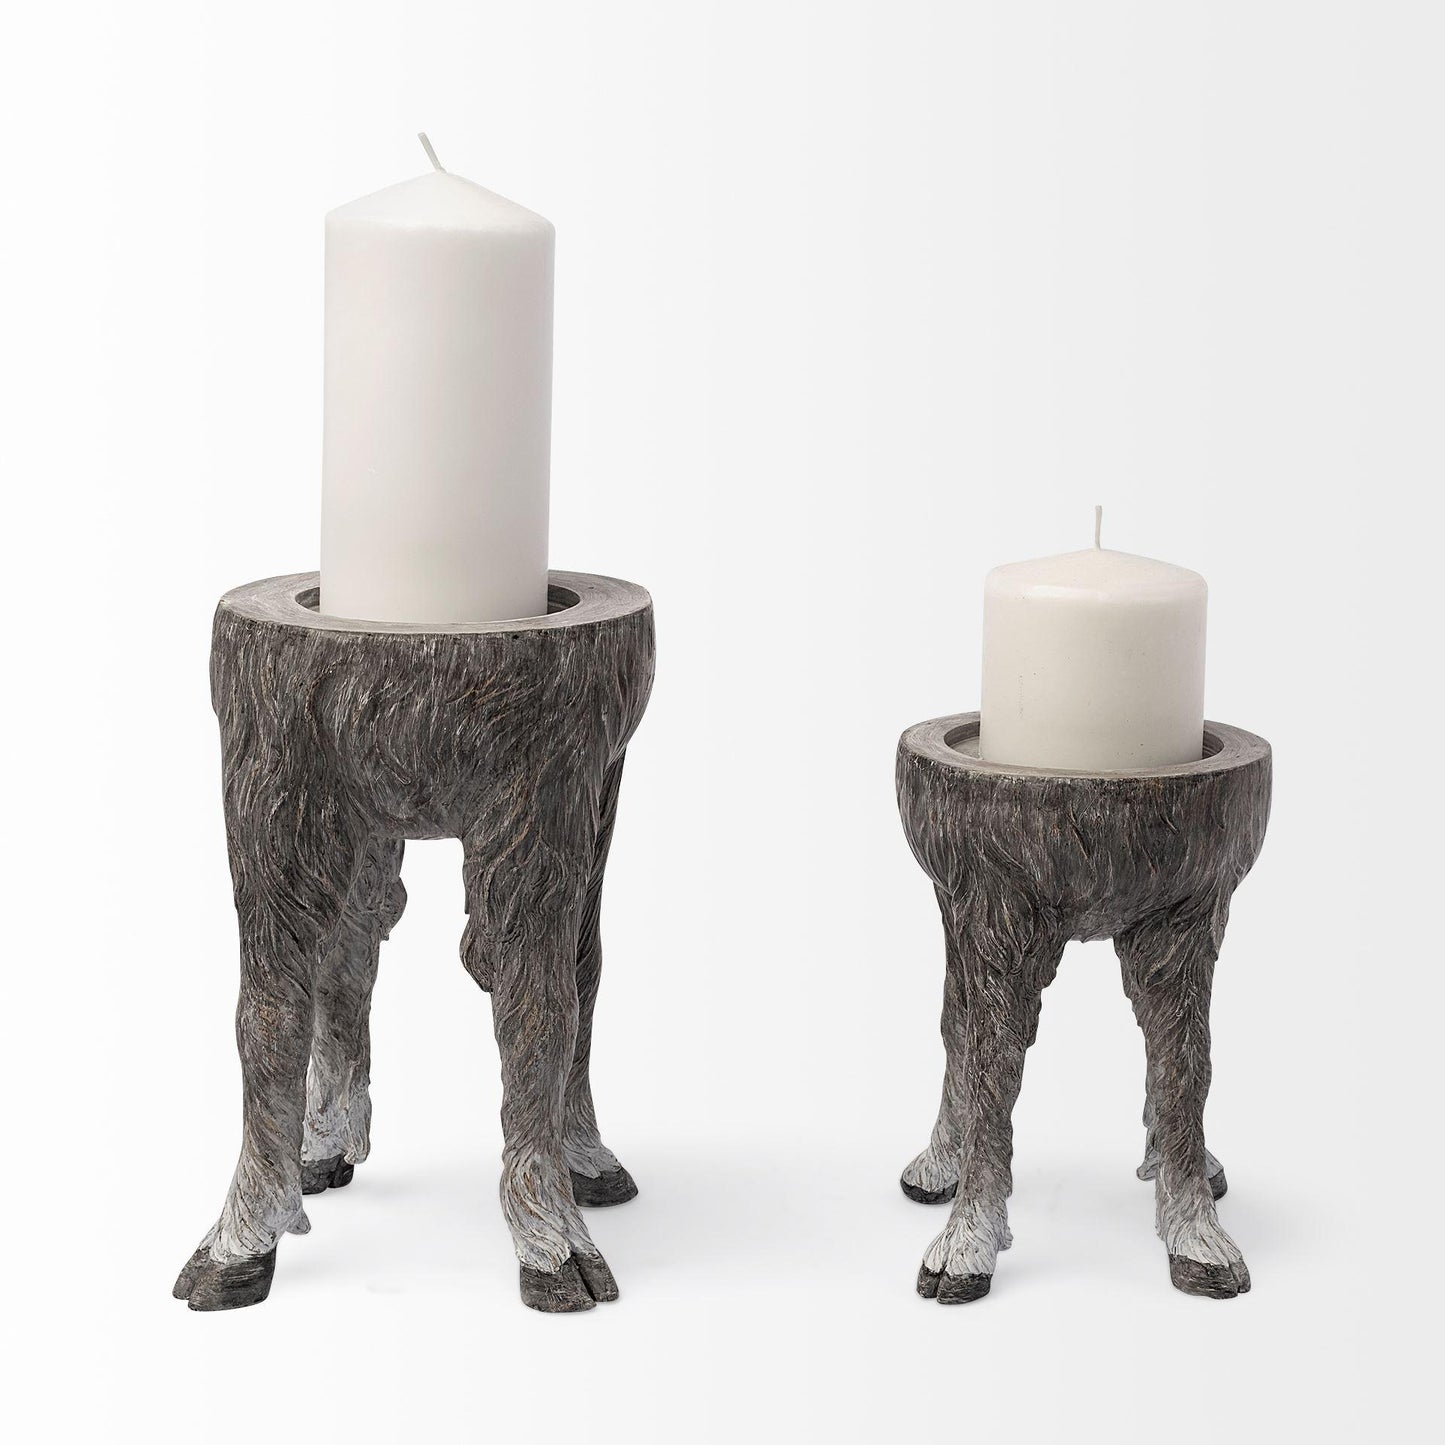 Pan Small Gray Ceramic Hoofed Table Candle Holder